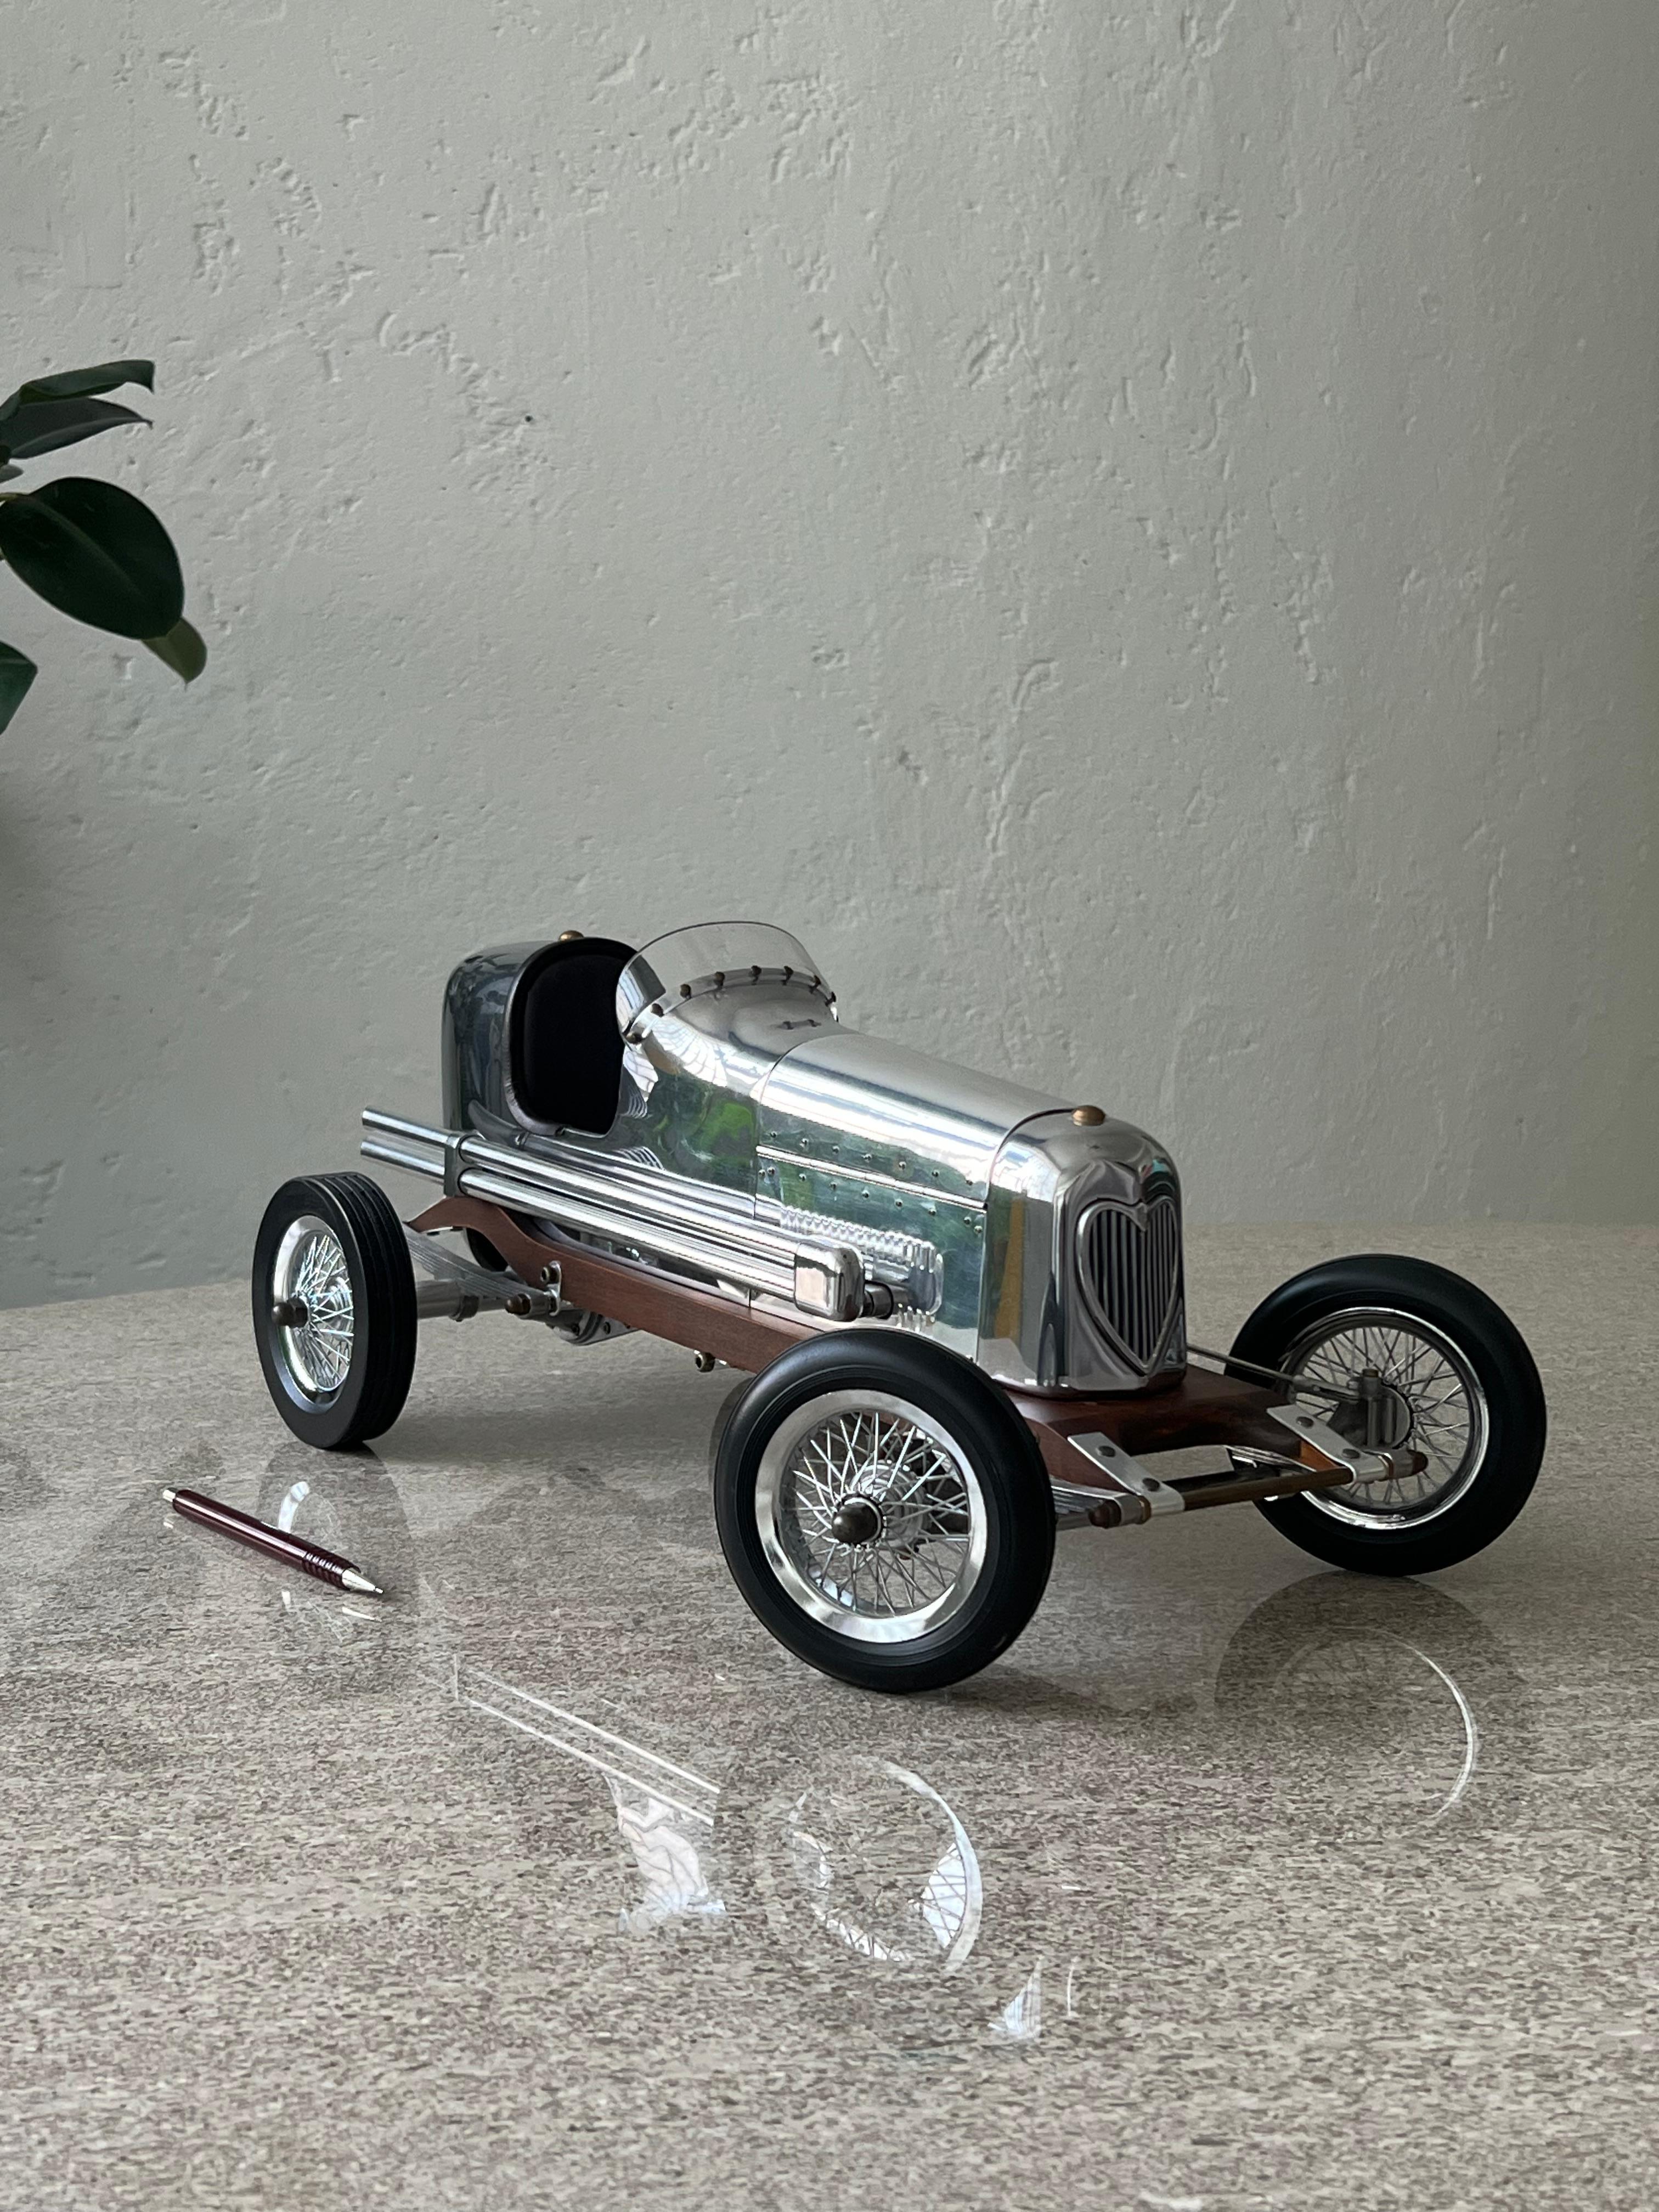 Decorative Model Car - Art Deco Race Car - Man Cave Collectible

A highly detailed, extremely attractive model of a classic racecar, replica of the miniature-engine scale models used for 